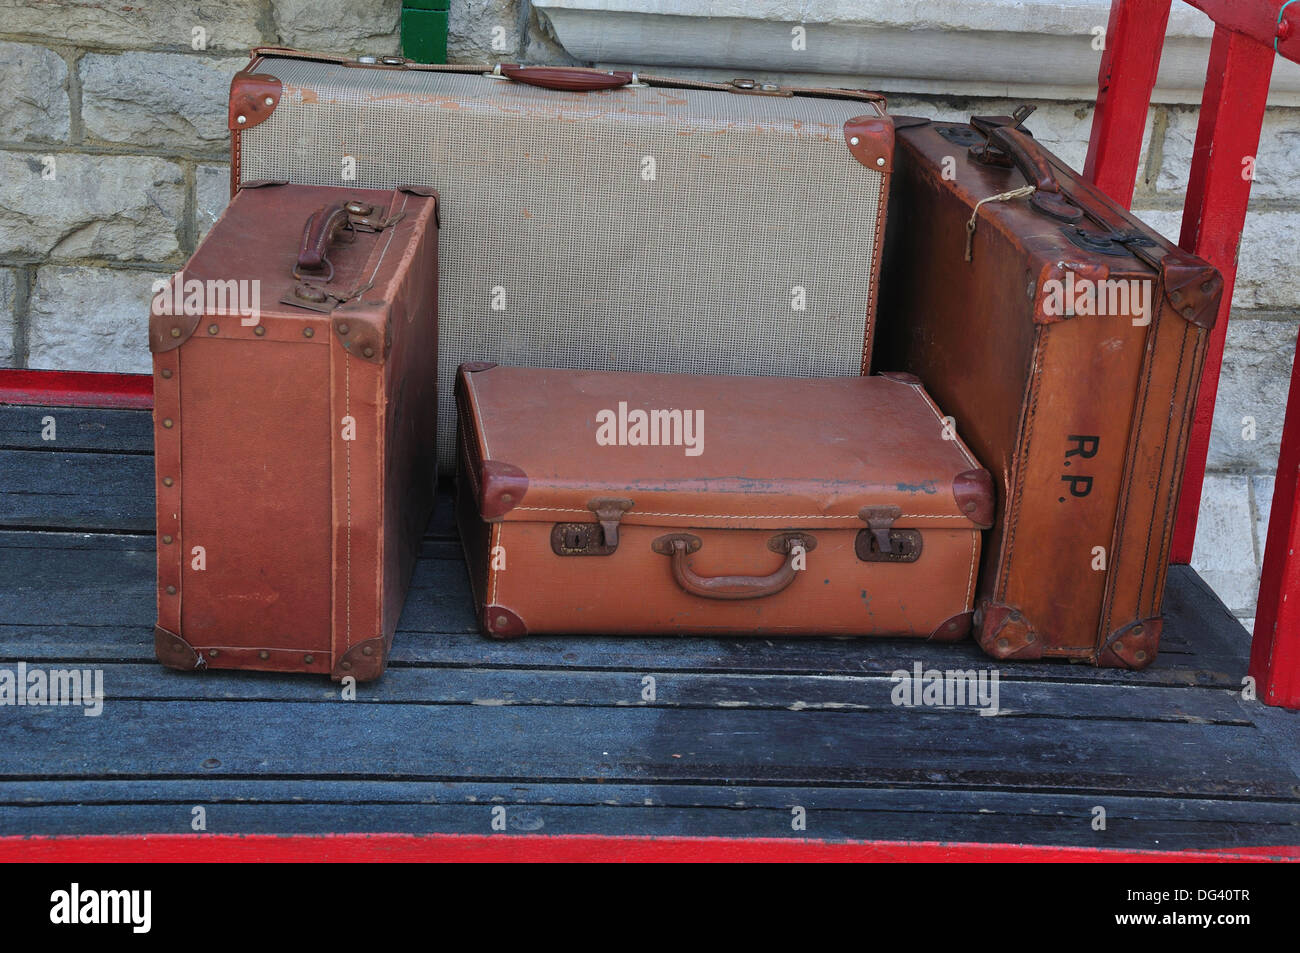 Old suitcases on a railway trolley UK Stock Photo